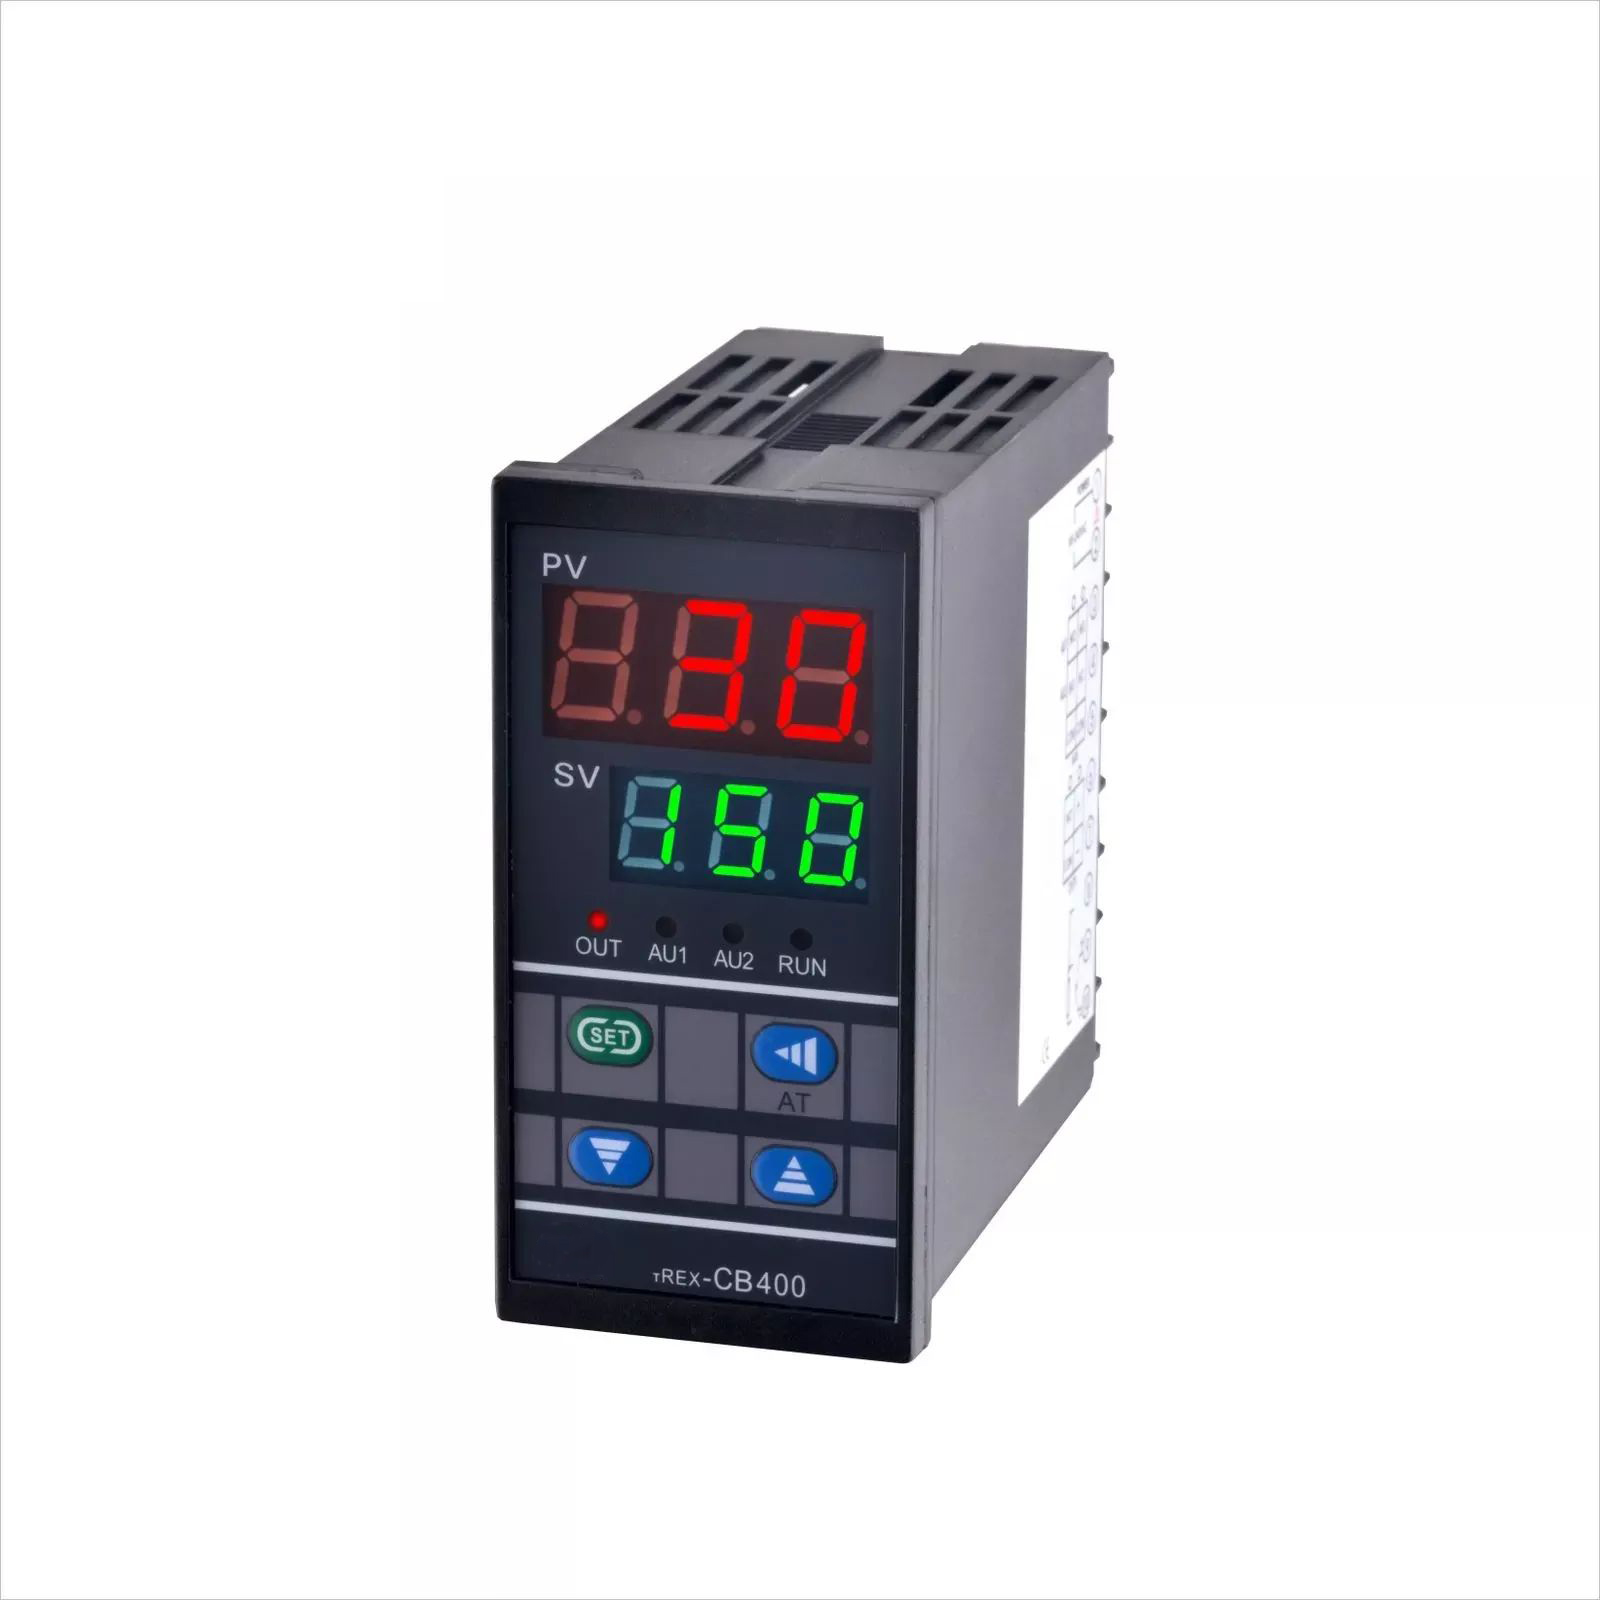 heating referigeration pressure Pid precision Temperature ControlTheory and Industrial Usage Refrigeration Controller